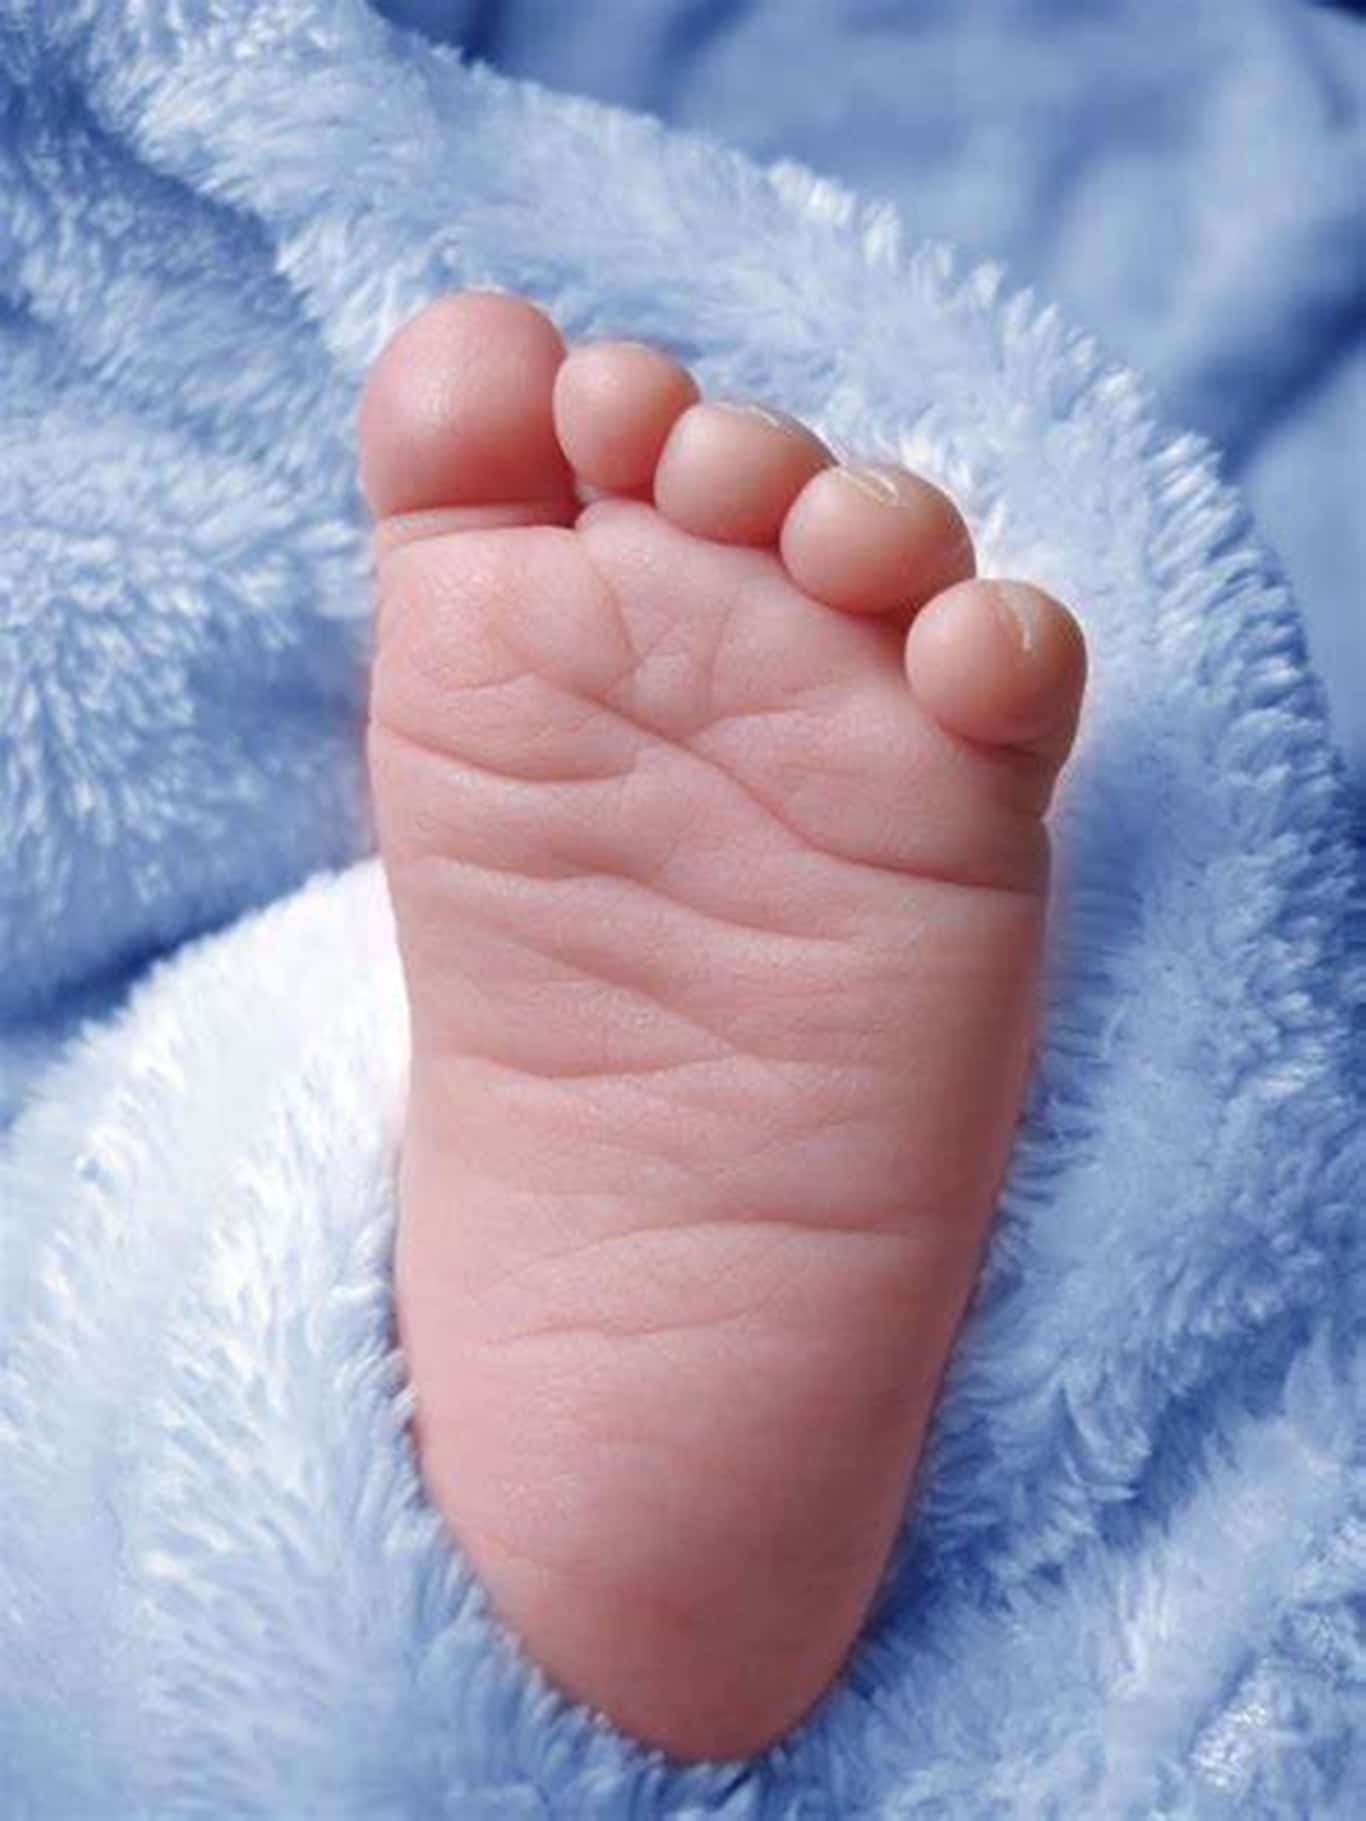 (meaning: Cute Picture Of A Baby Foot)